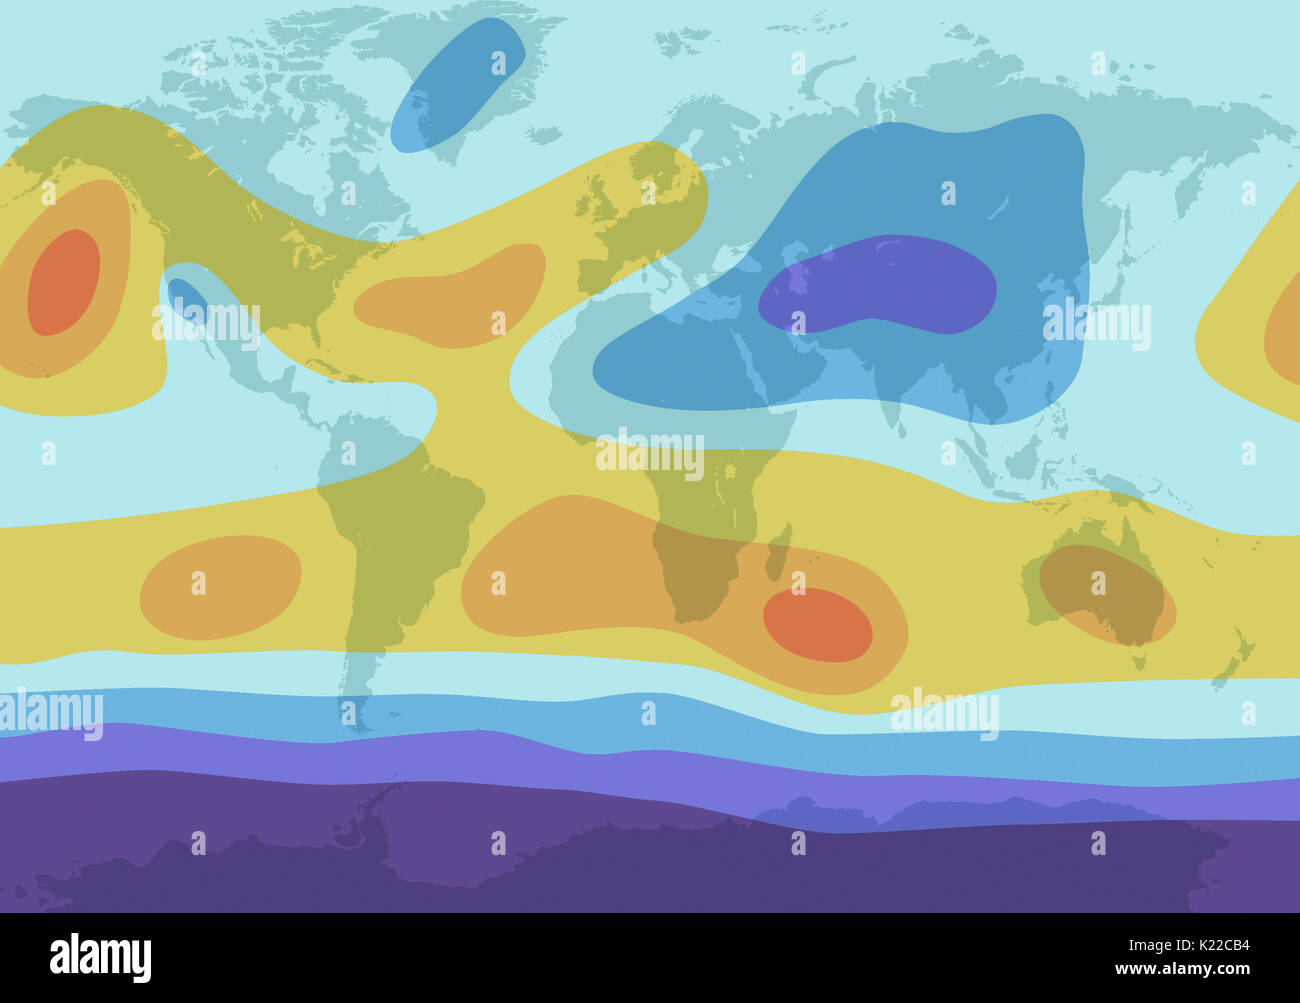 In July, the heat that reigns in Asia maintains a huge low-pressure zone that extends as far as Africa. The oceans in the Northern Hemisphere are under high-pressure zones.(the Azores and Pacific anticyclones), but the subpolar depressions have almost disappeared. In the Southern Hemisphere, a broad anticyclonic belt settles over all the tropical regions, both continental and oceanic. The low- pressure zone that sits above the Antarctic coast varies little. Stock Photo